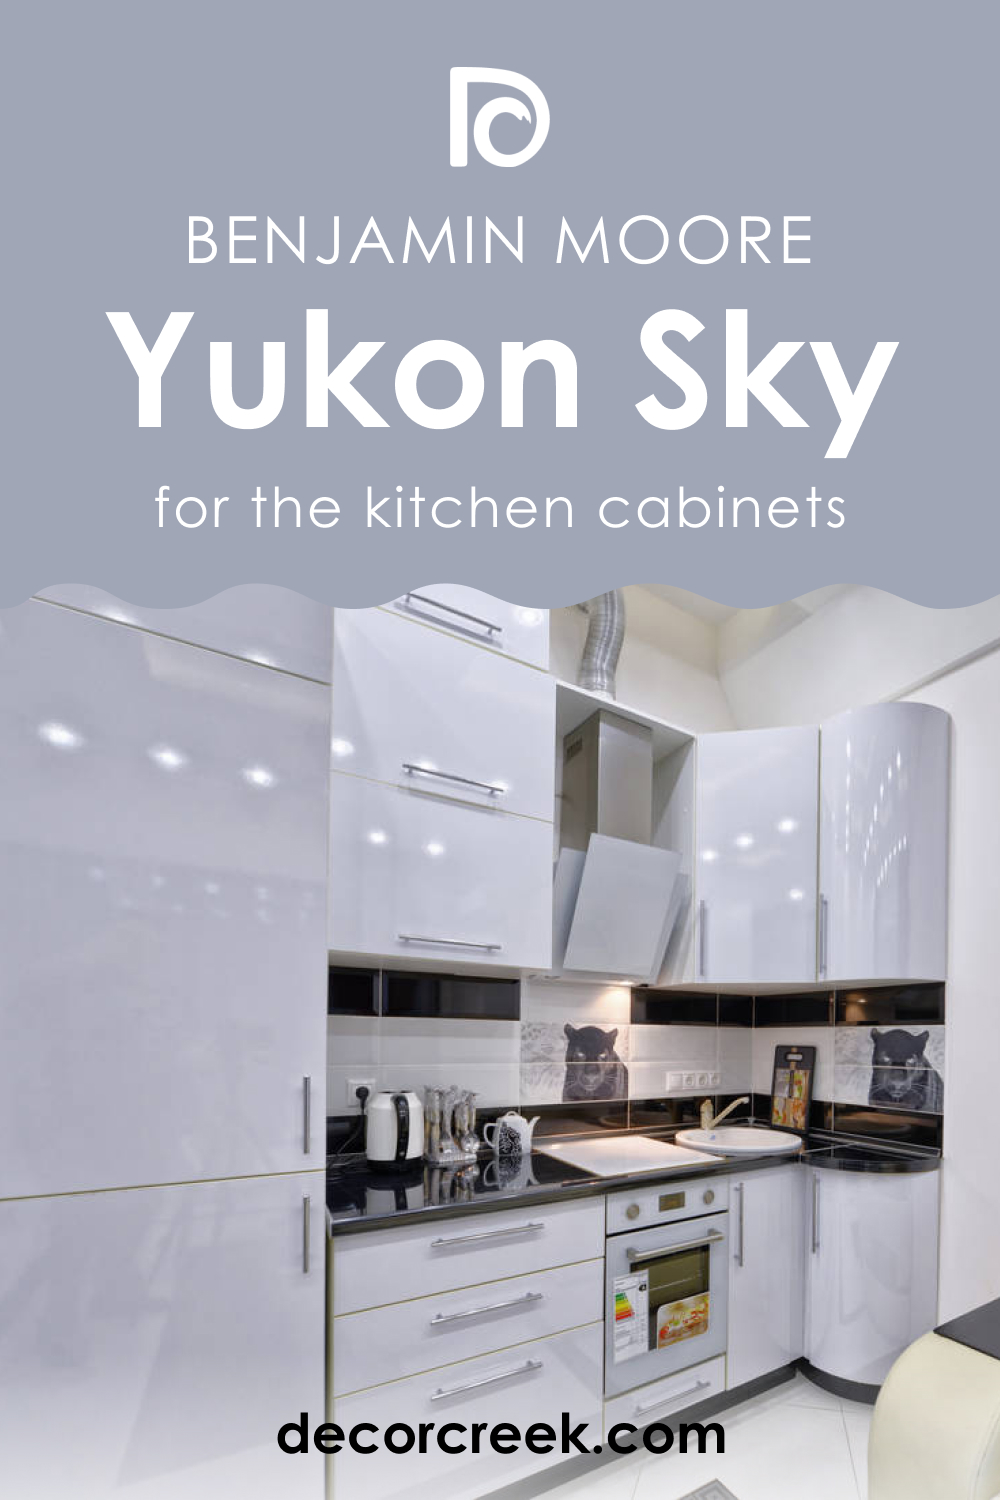 How to Use Yukon Sky 1439 on the Kitchen Cabinets?